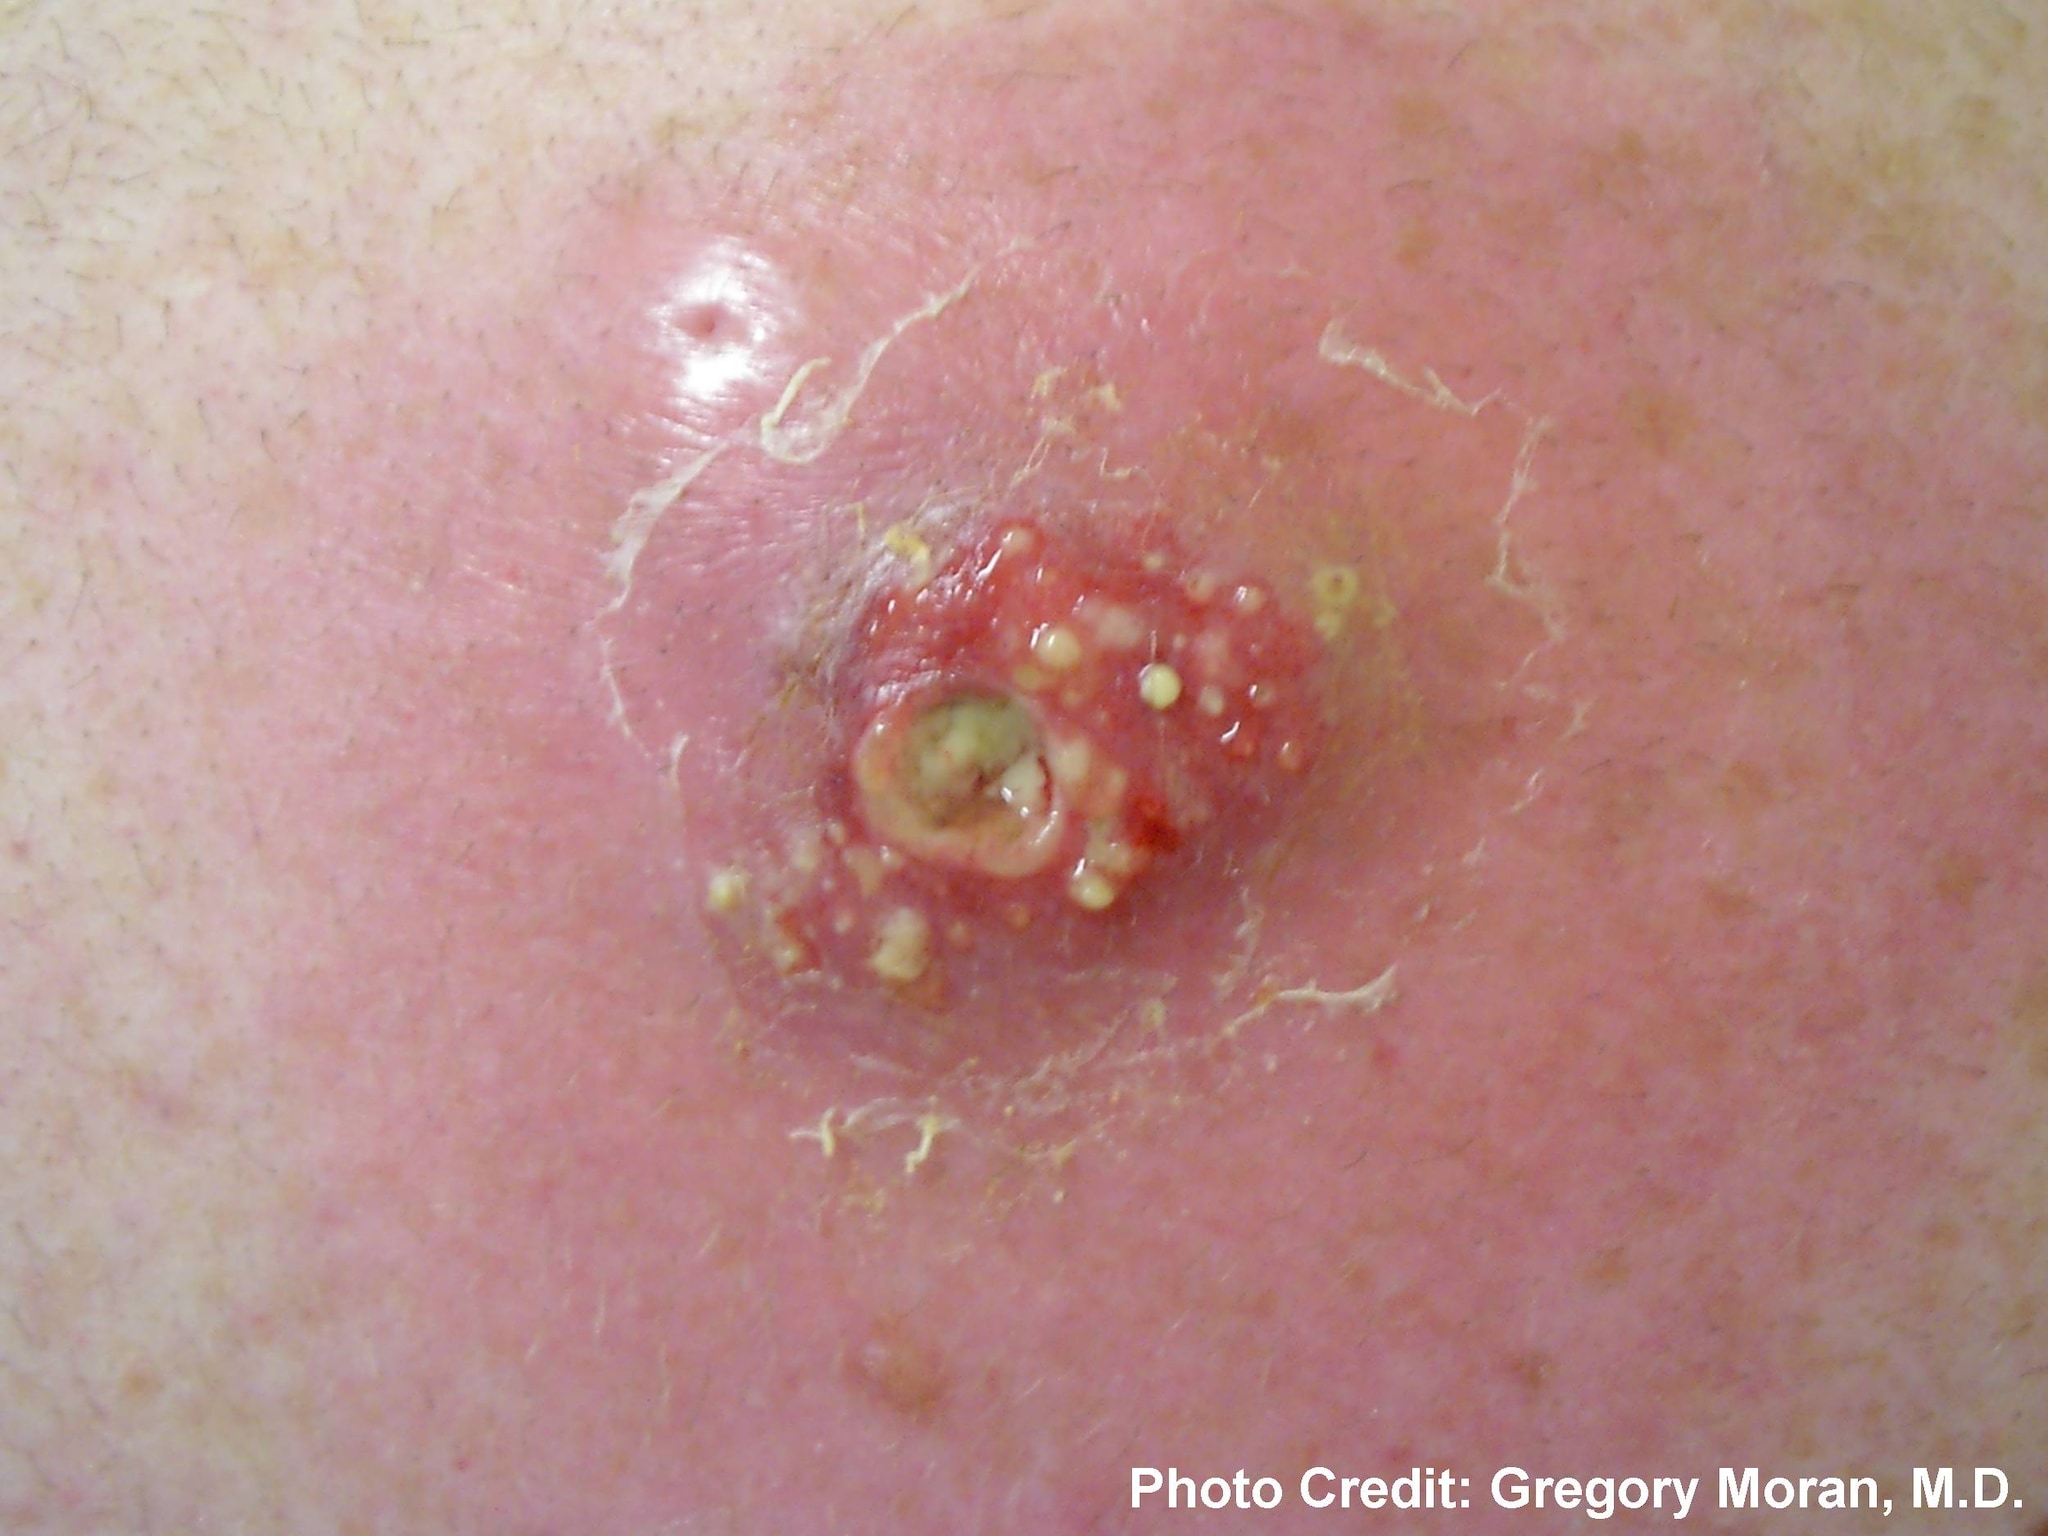 Close up of Cutaneous abscess on the back caused by MRSA